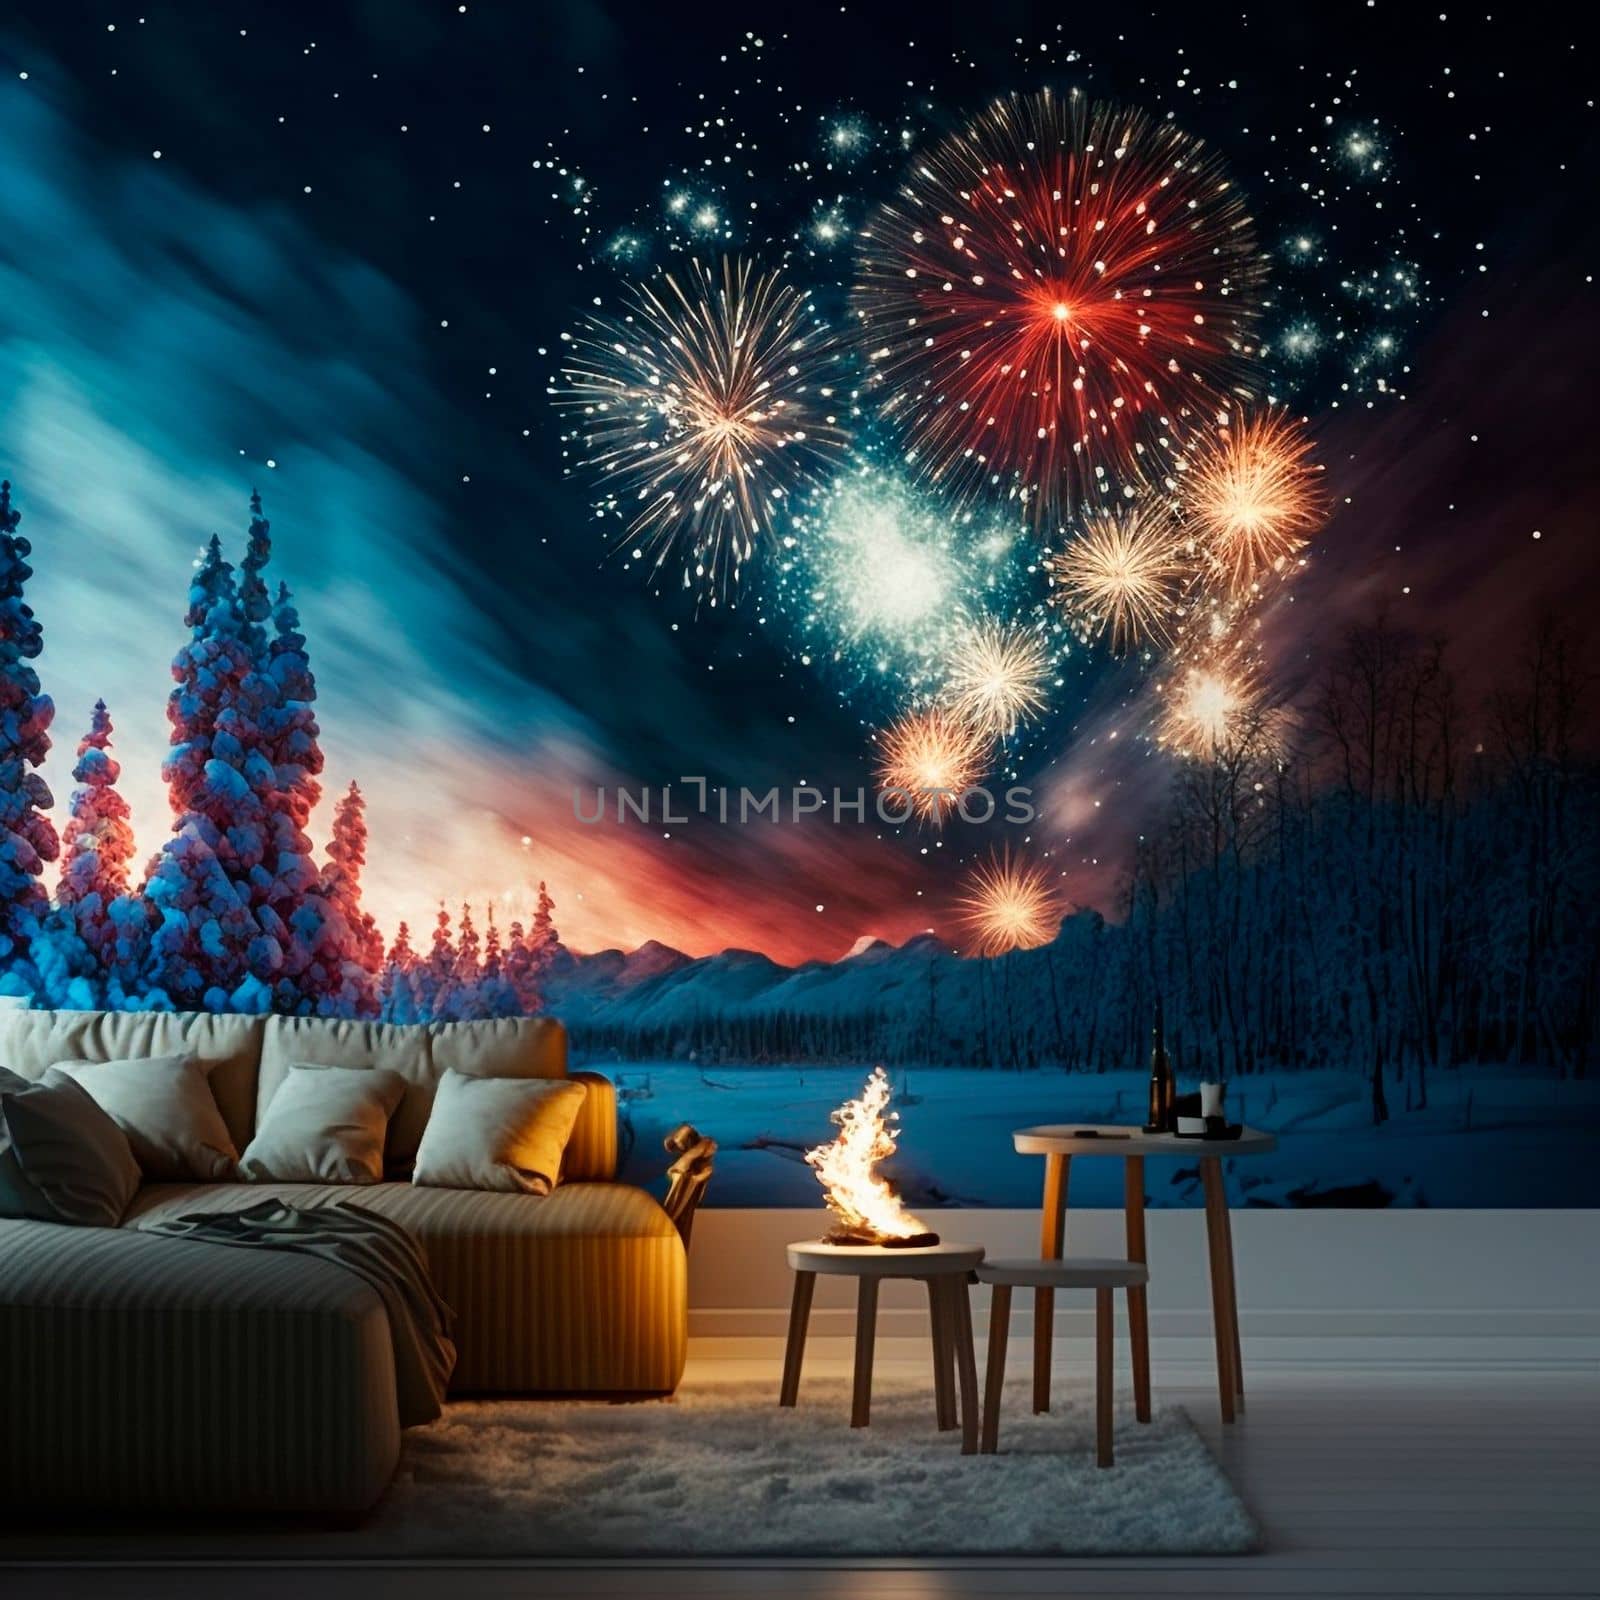 Bedroom with wallpaper depicting the night sky in fireworks by NeuroSky